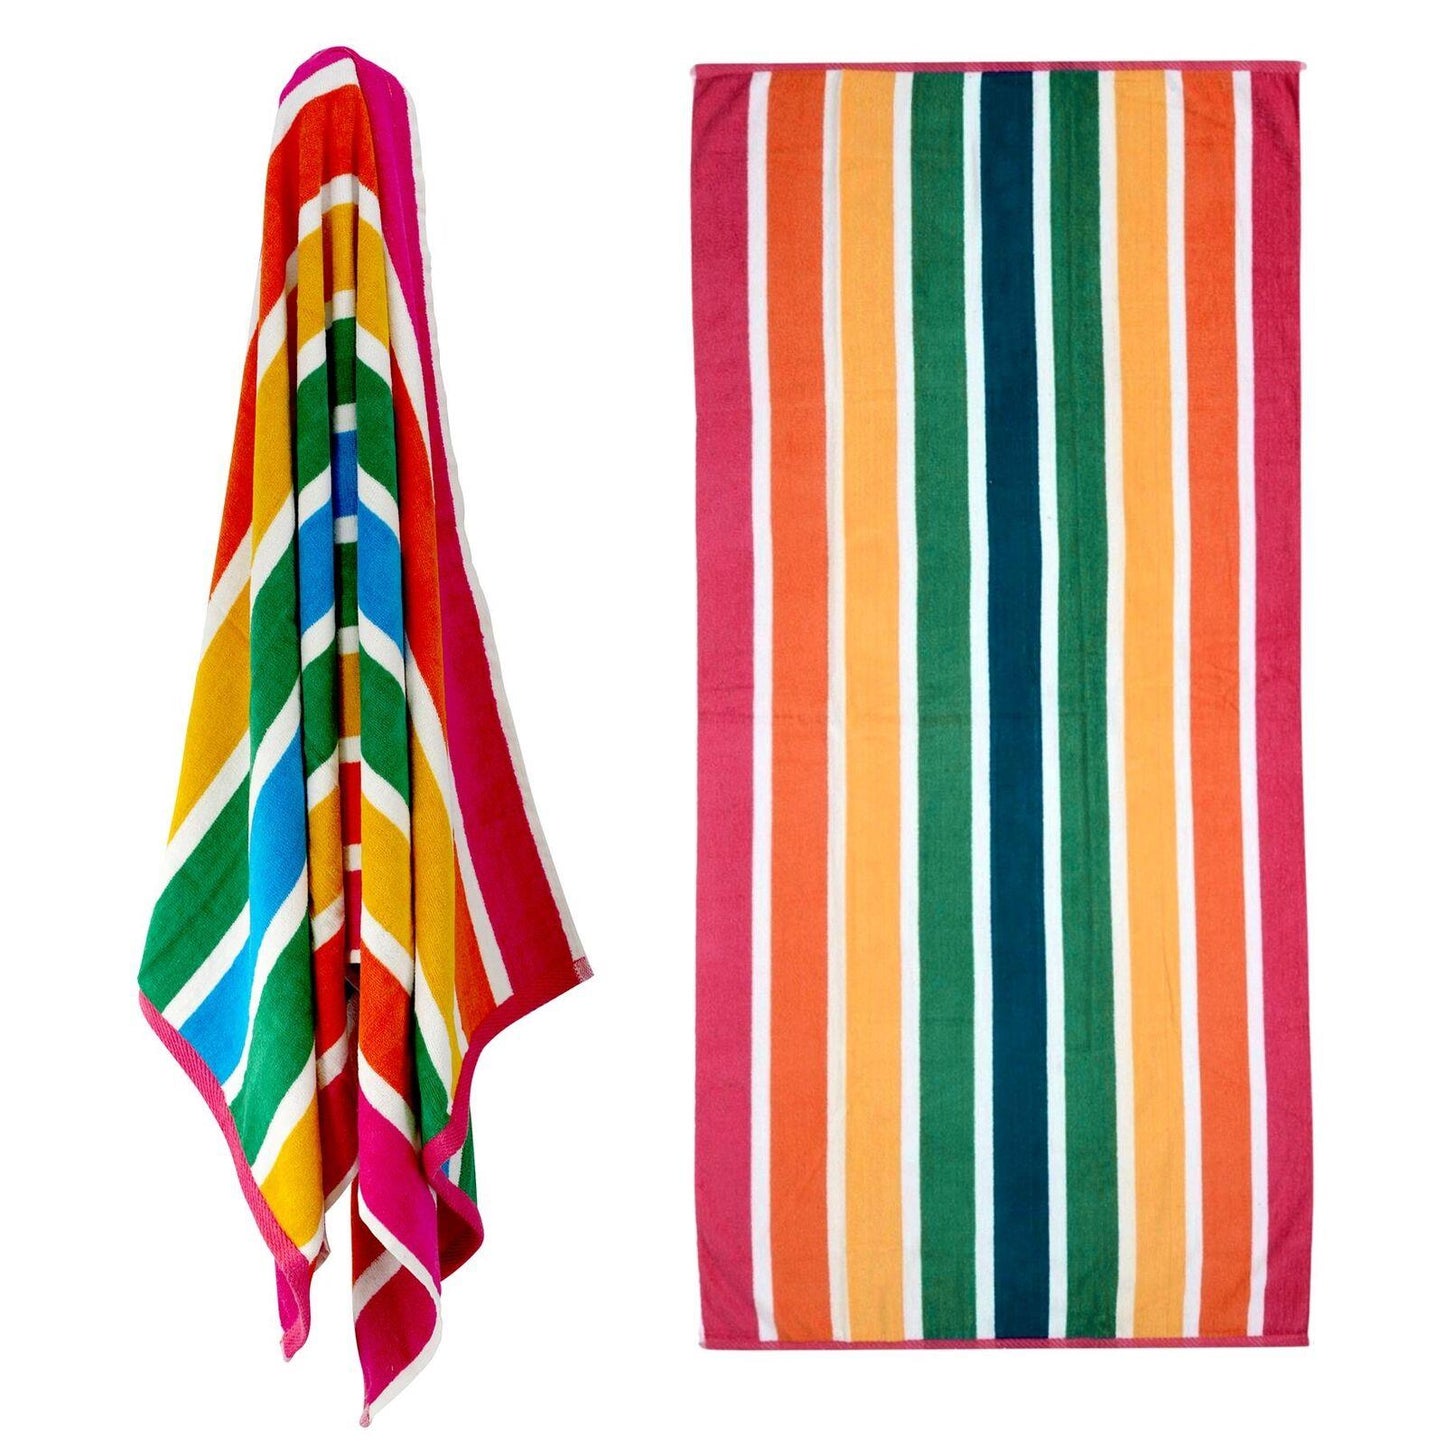 Large Velour Striped Beach Towel (Tropical Burst) by Geezy - UKBuyZone